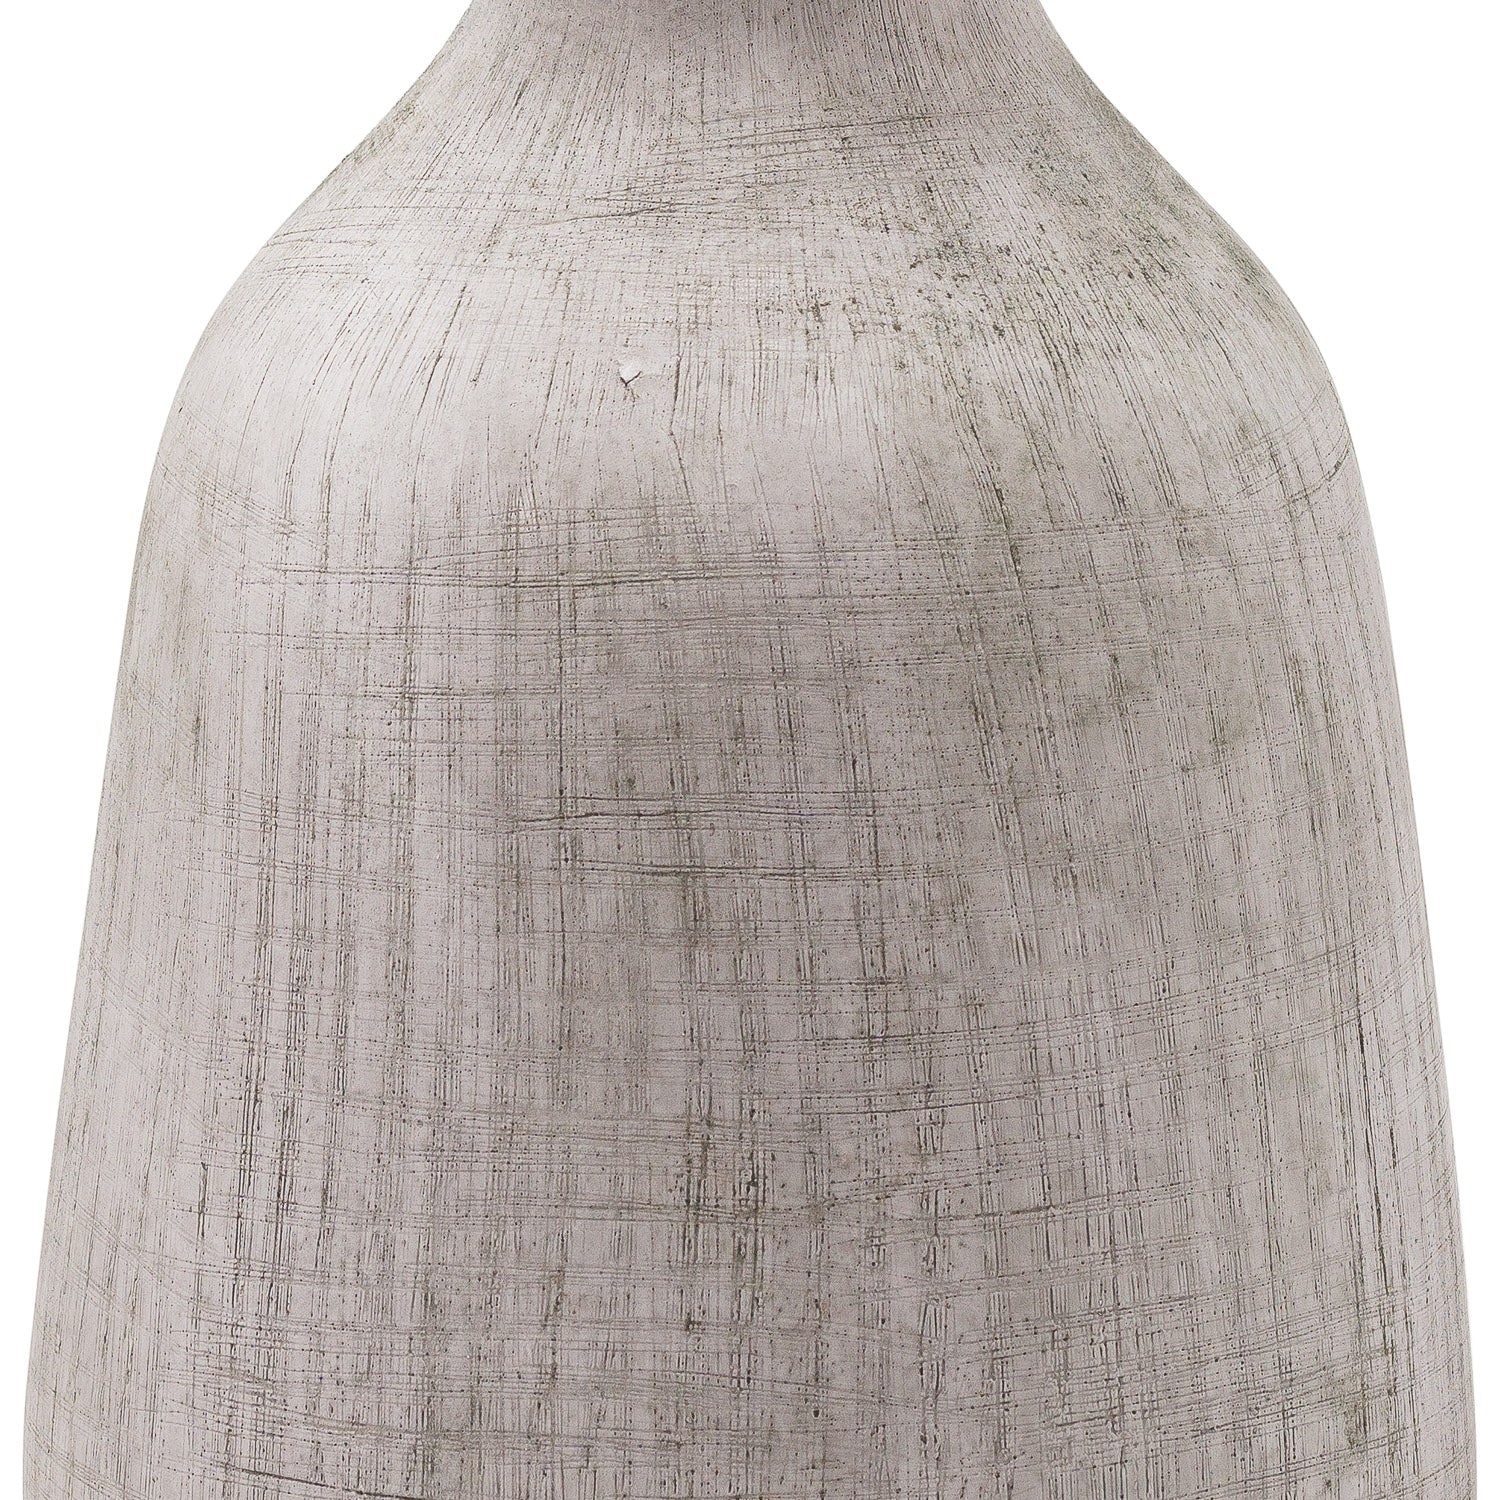 Matt Grey Ceramic Flared Vase With Earthy Distressed Texture – Click Style